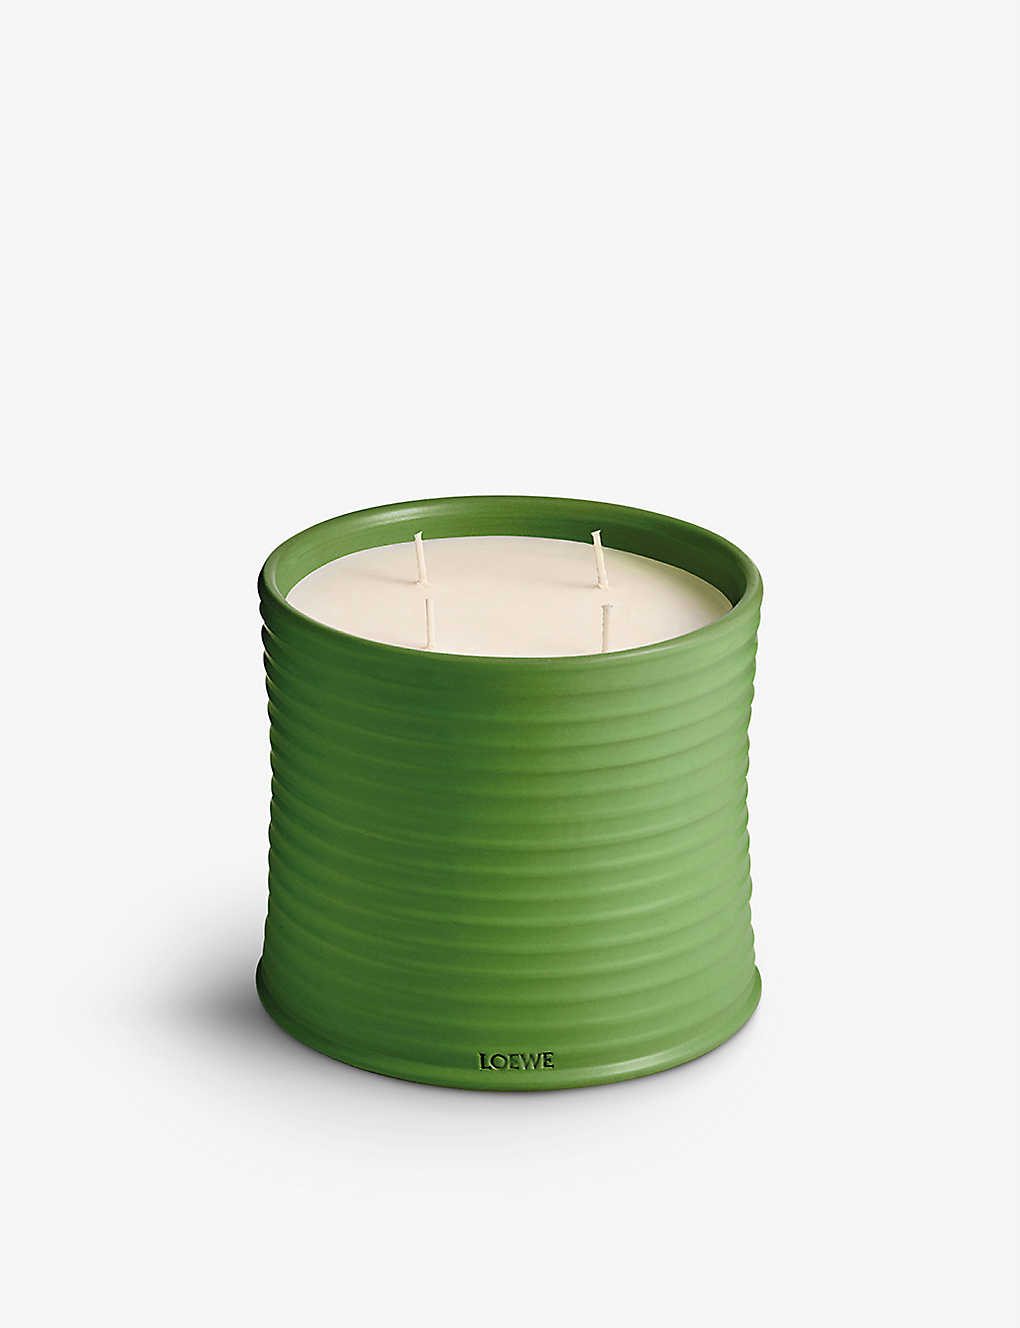 Loewe Luscious Pea Large Scented Candle 2.12kg